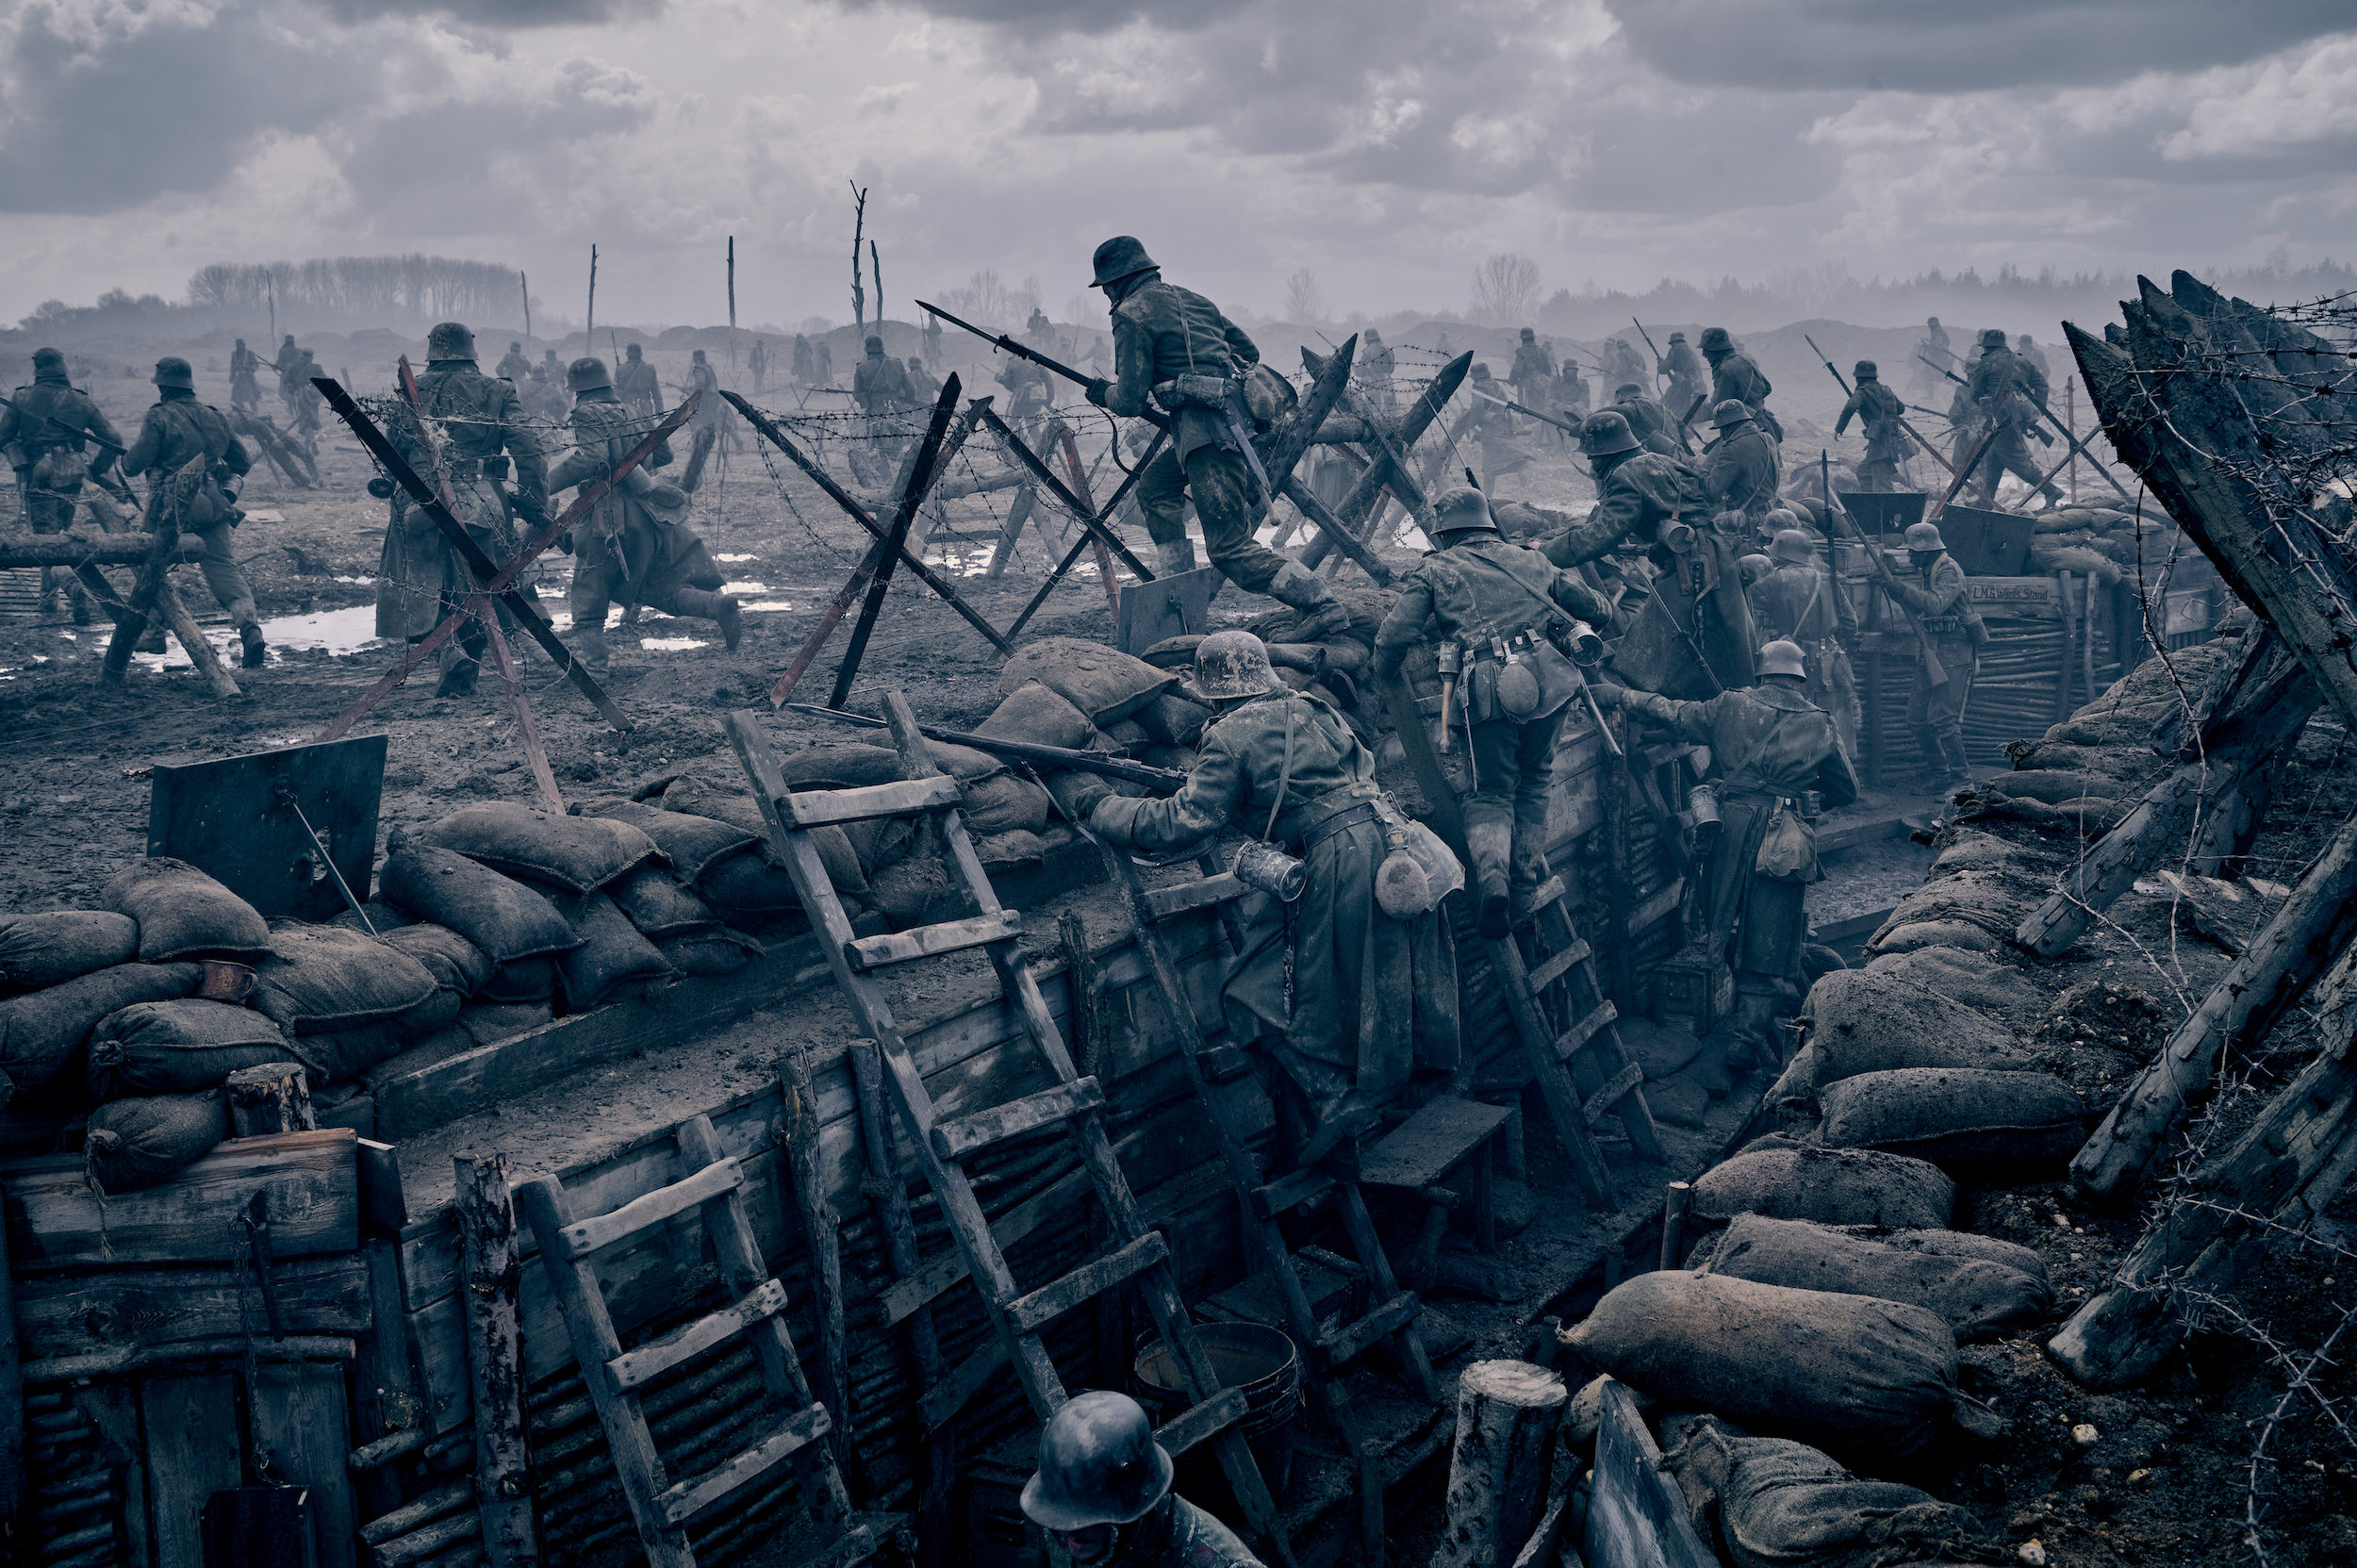 First Look: New Image from Germany's 'All Quiet on the Western Front'